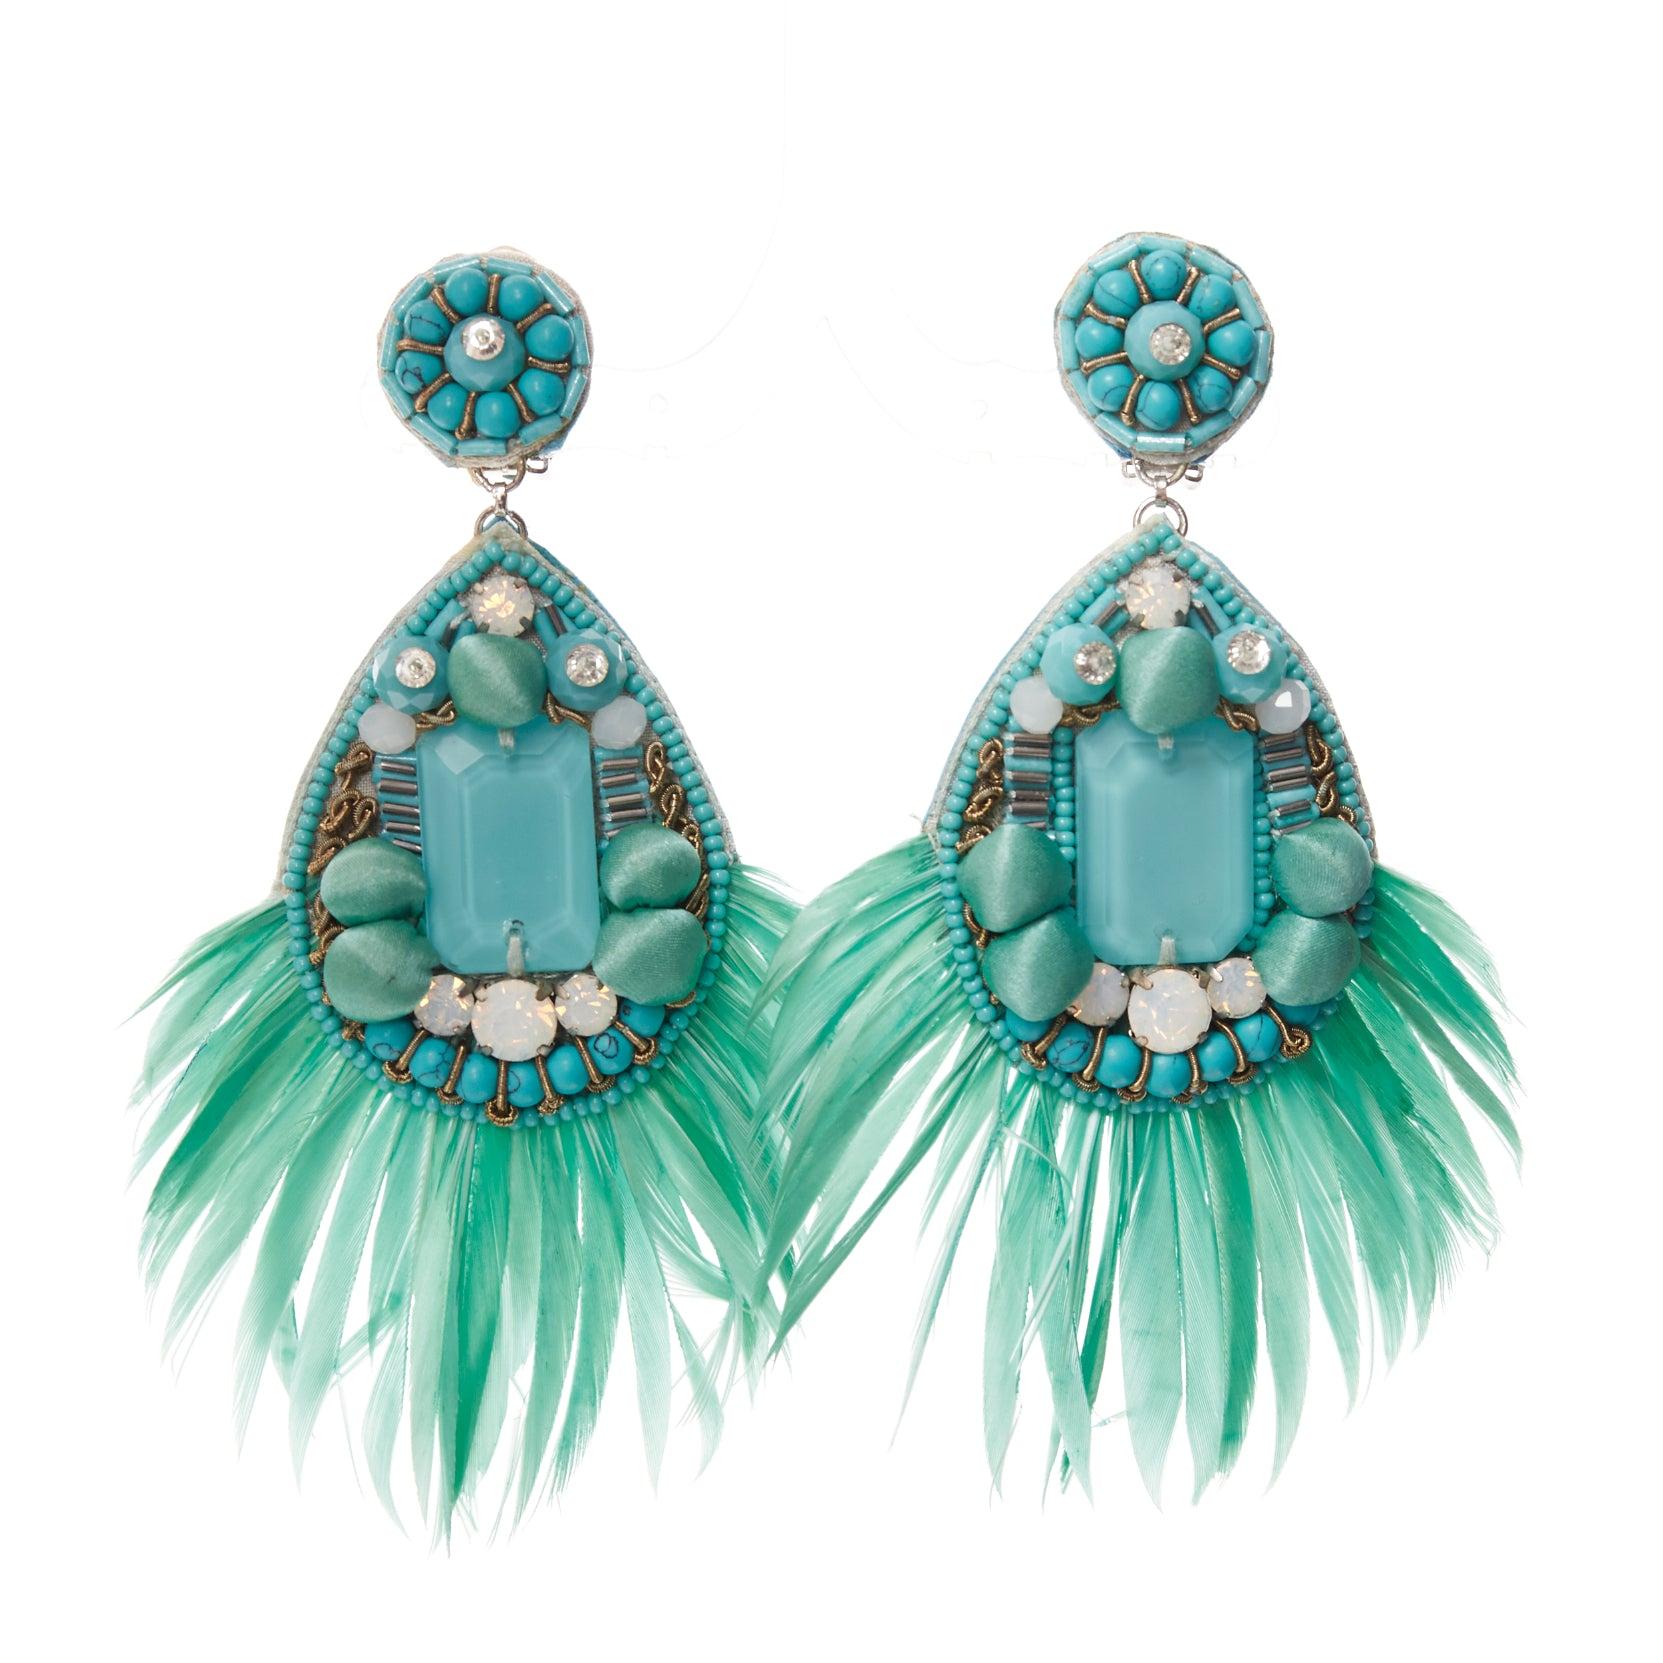 RANJANA KHAN teal green feather beads big dangling clip on earrings
Reference: AAWC/A01213
Brand: Ranjana Khan
Material: Feather, Fabric
Color: Green, Blue
Pattern: Solid
Closure: Clip On
Lining: Green Leather
Extra Details: Green leather